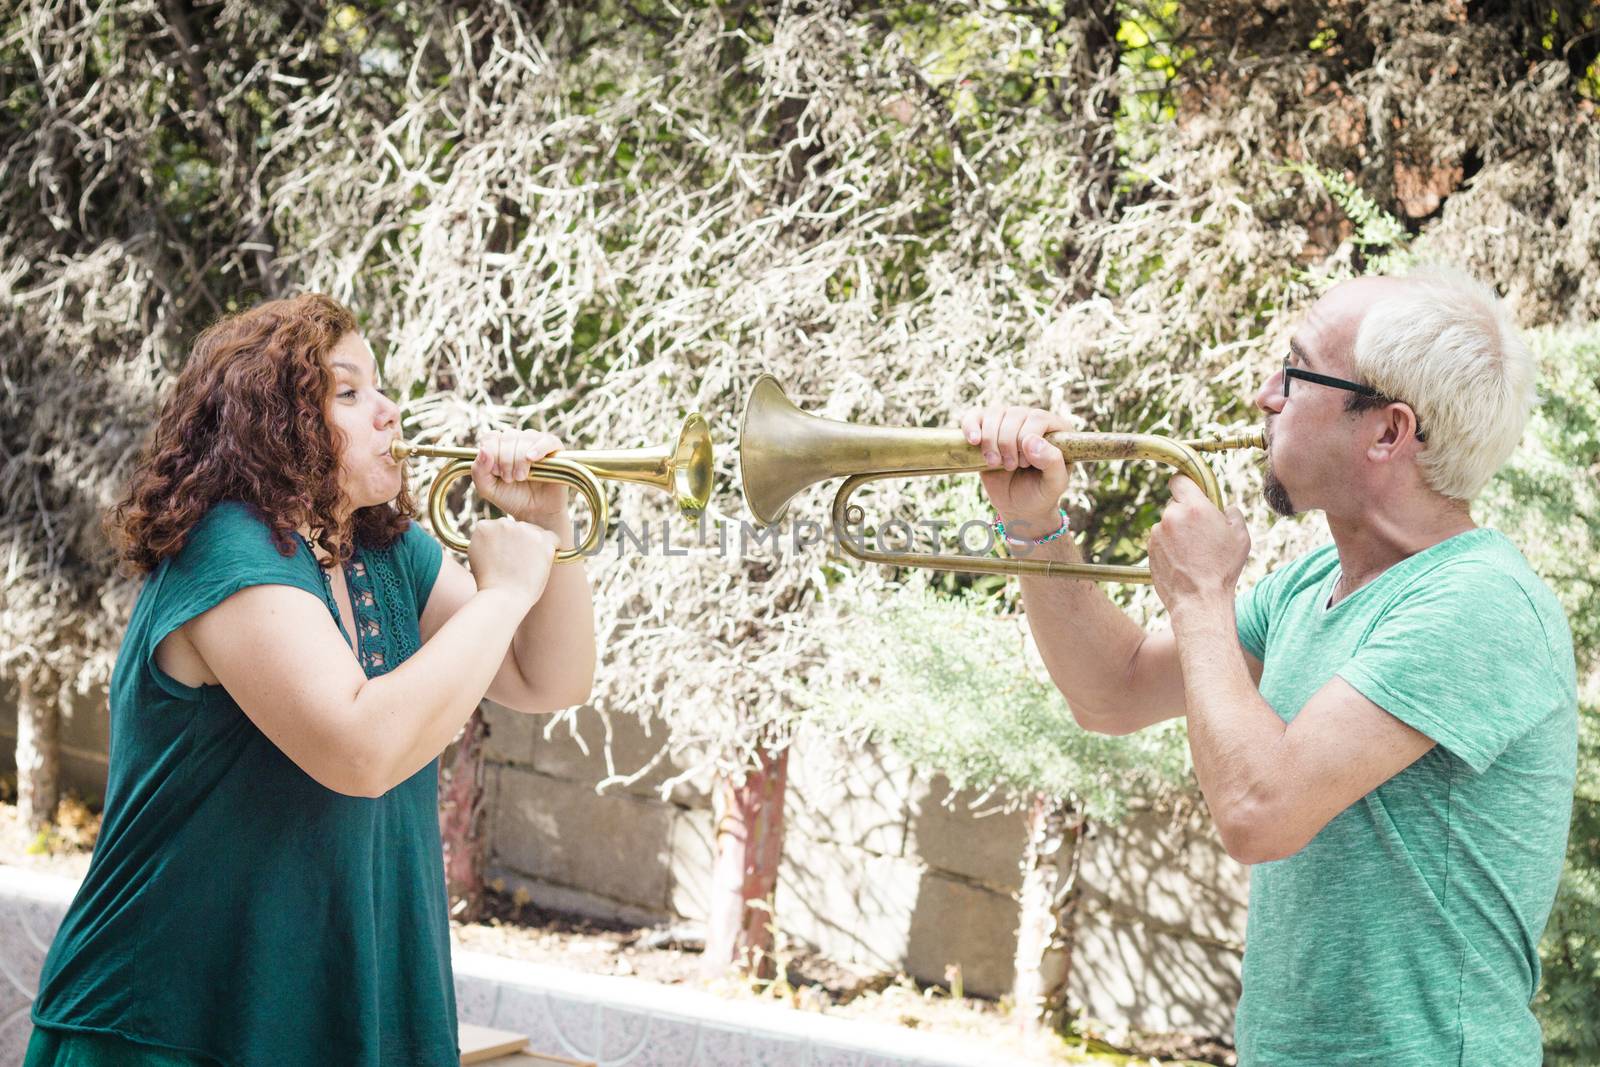 Man and woman playing trumpet by GemaIbarra